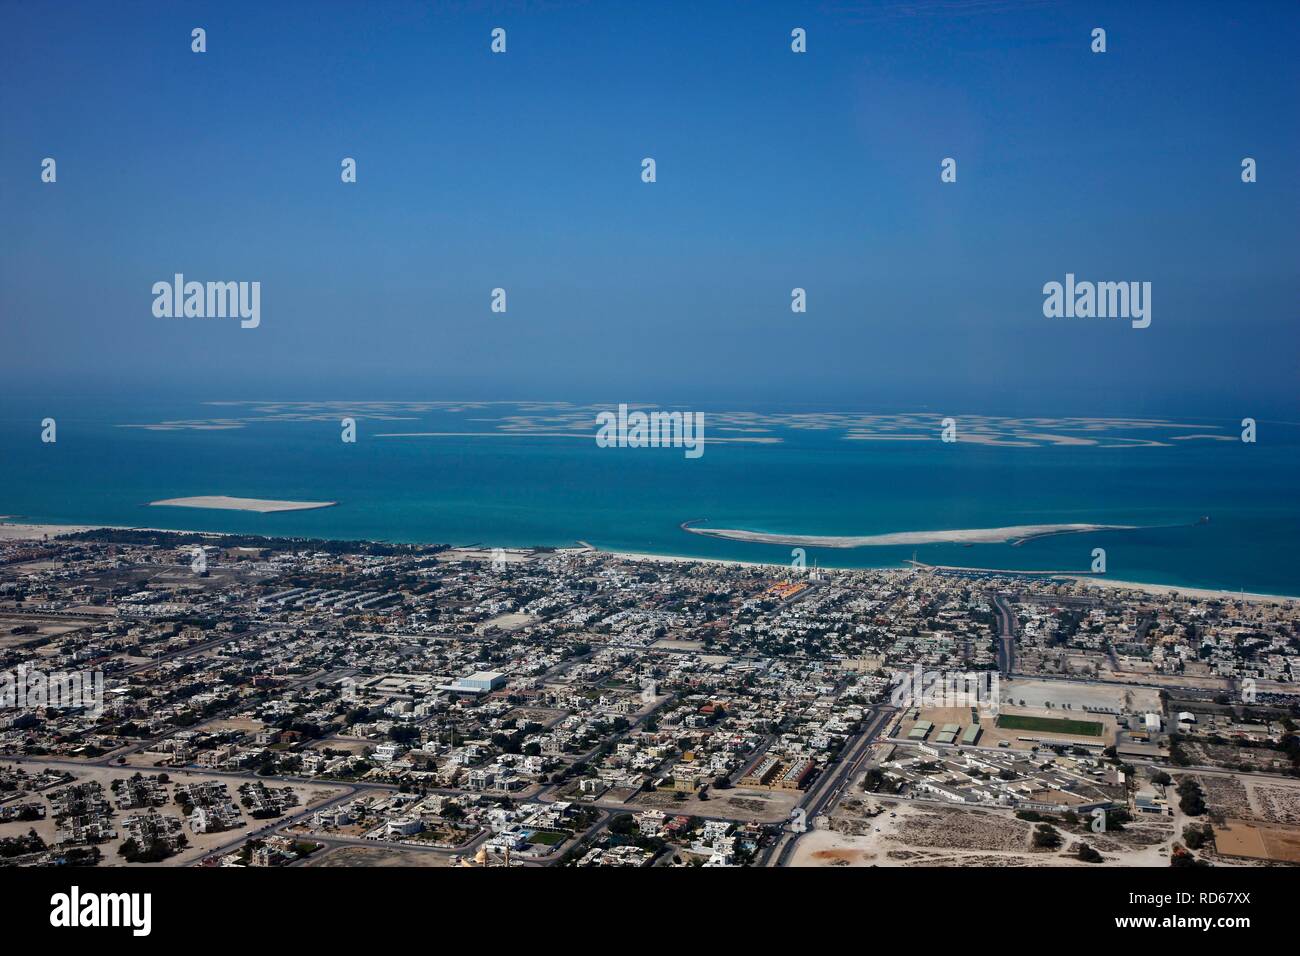 View of the artificial islands of The World off the coast of Dubai, United Arab Emirates, Middle East Stock Photo